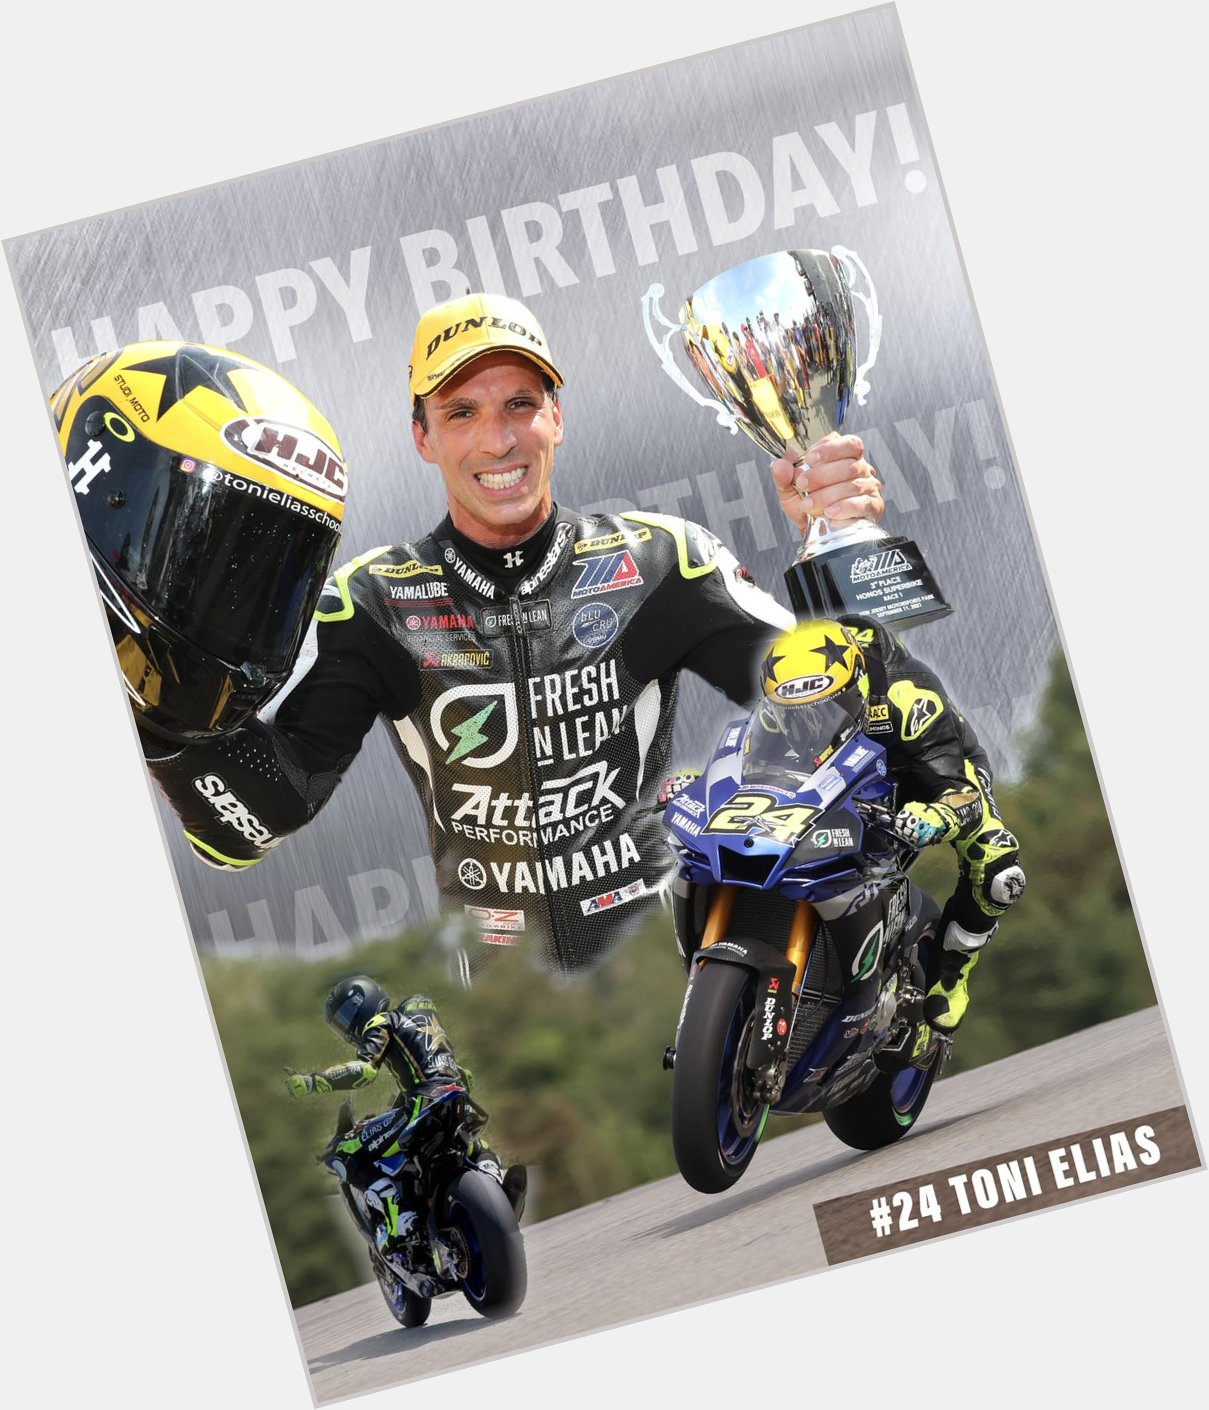 Happy birthday to our 2017 Superbike champion, Toni Elias. Have a fantastic day! 